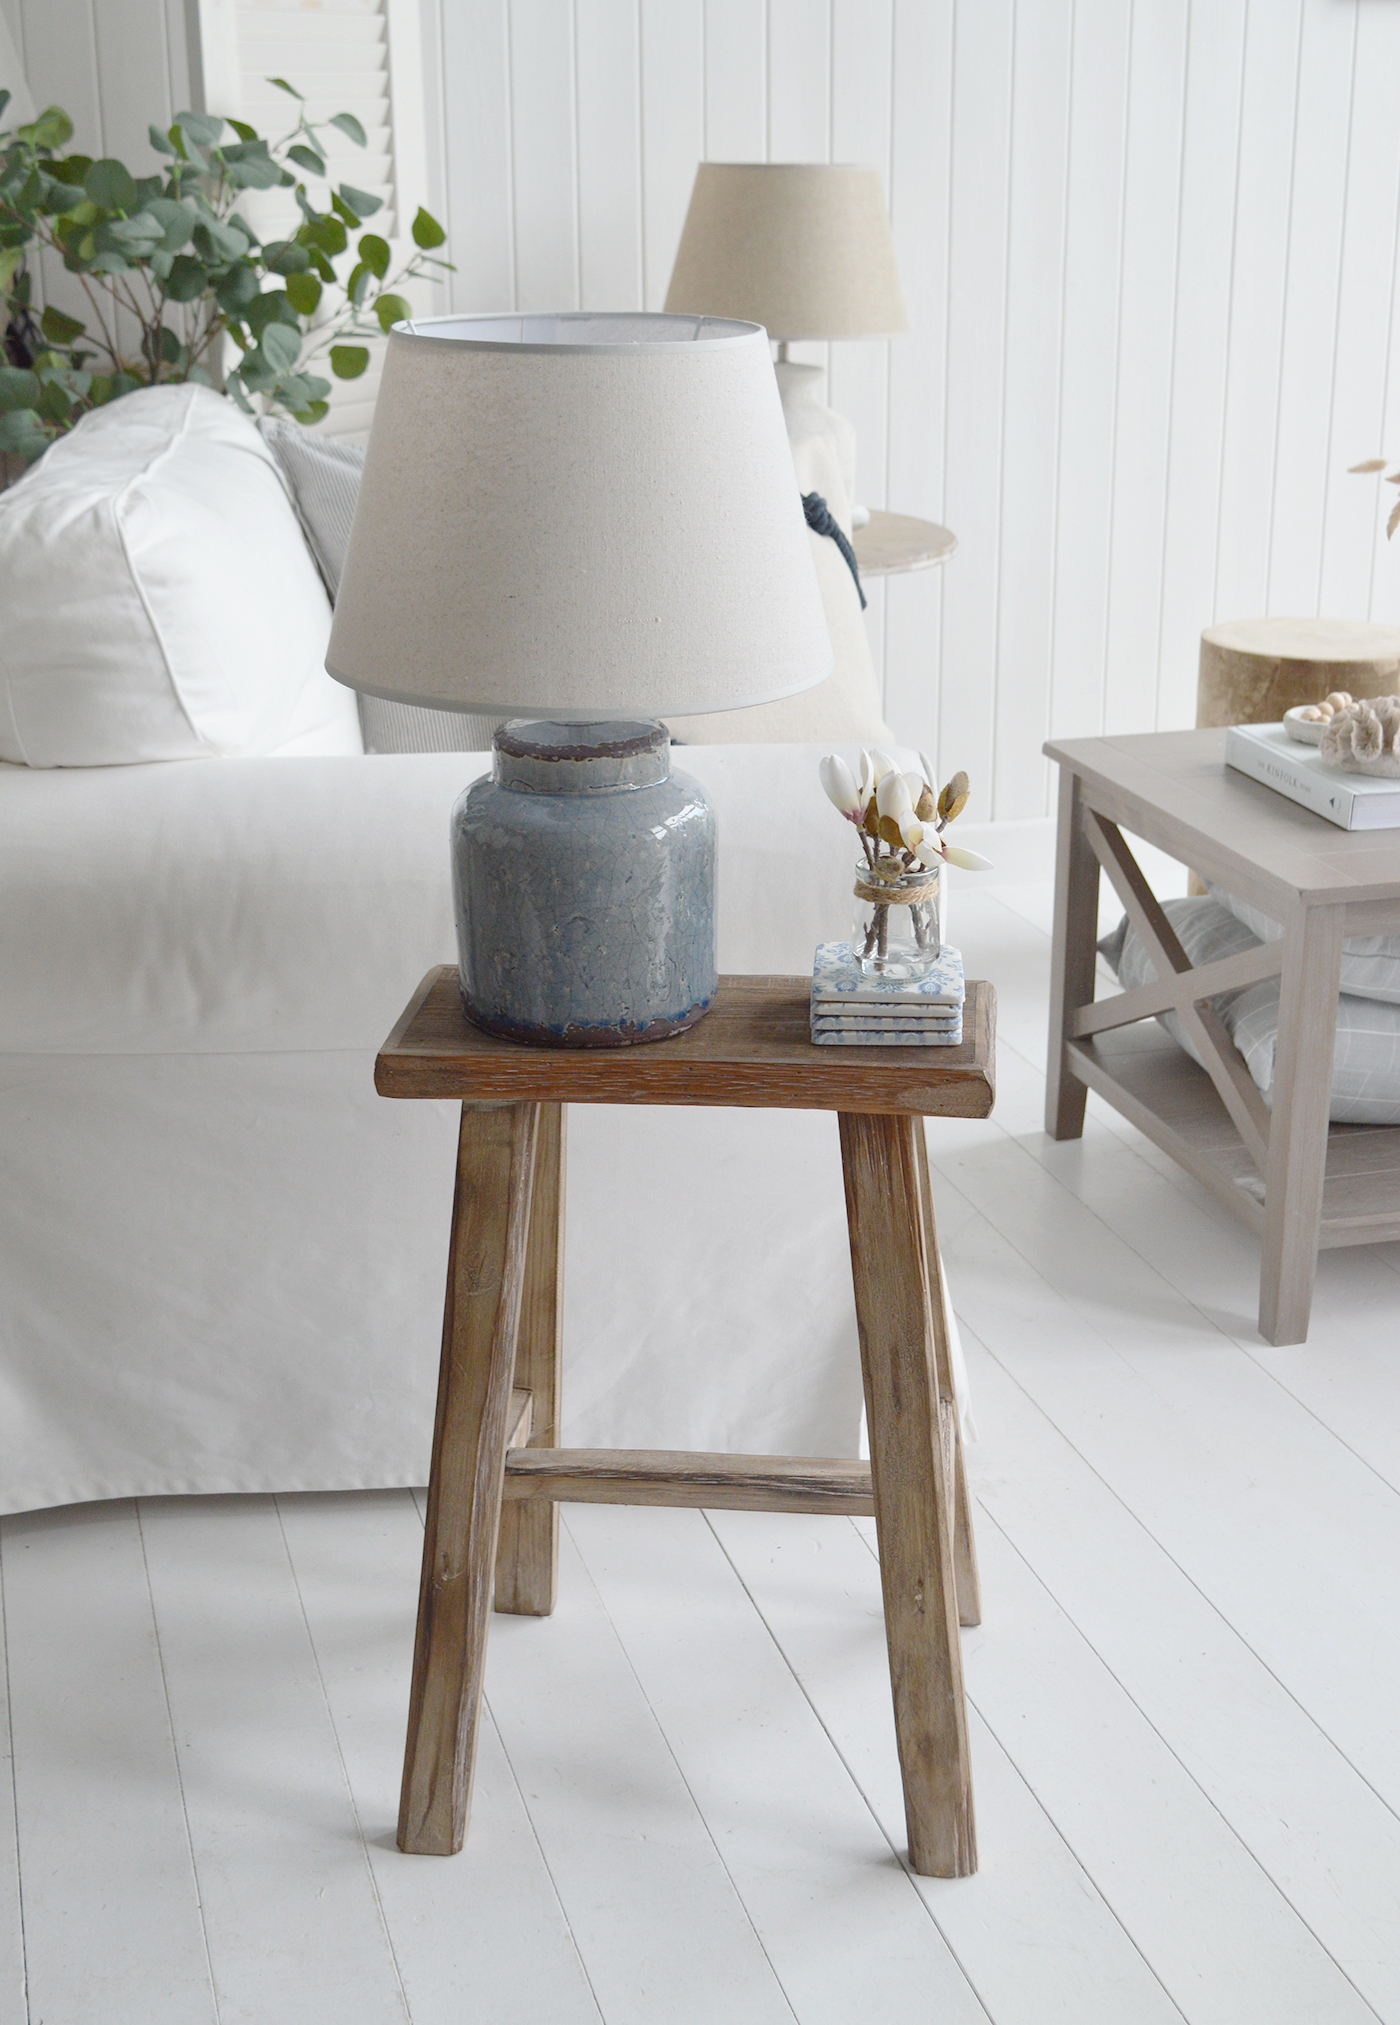 The Georgetown rustic wooden stool with our Hamptons style Blue Compton ceramic lamp... a lovely combination for coastal chic furniture and interiors